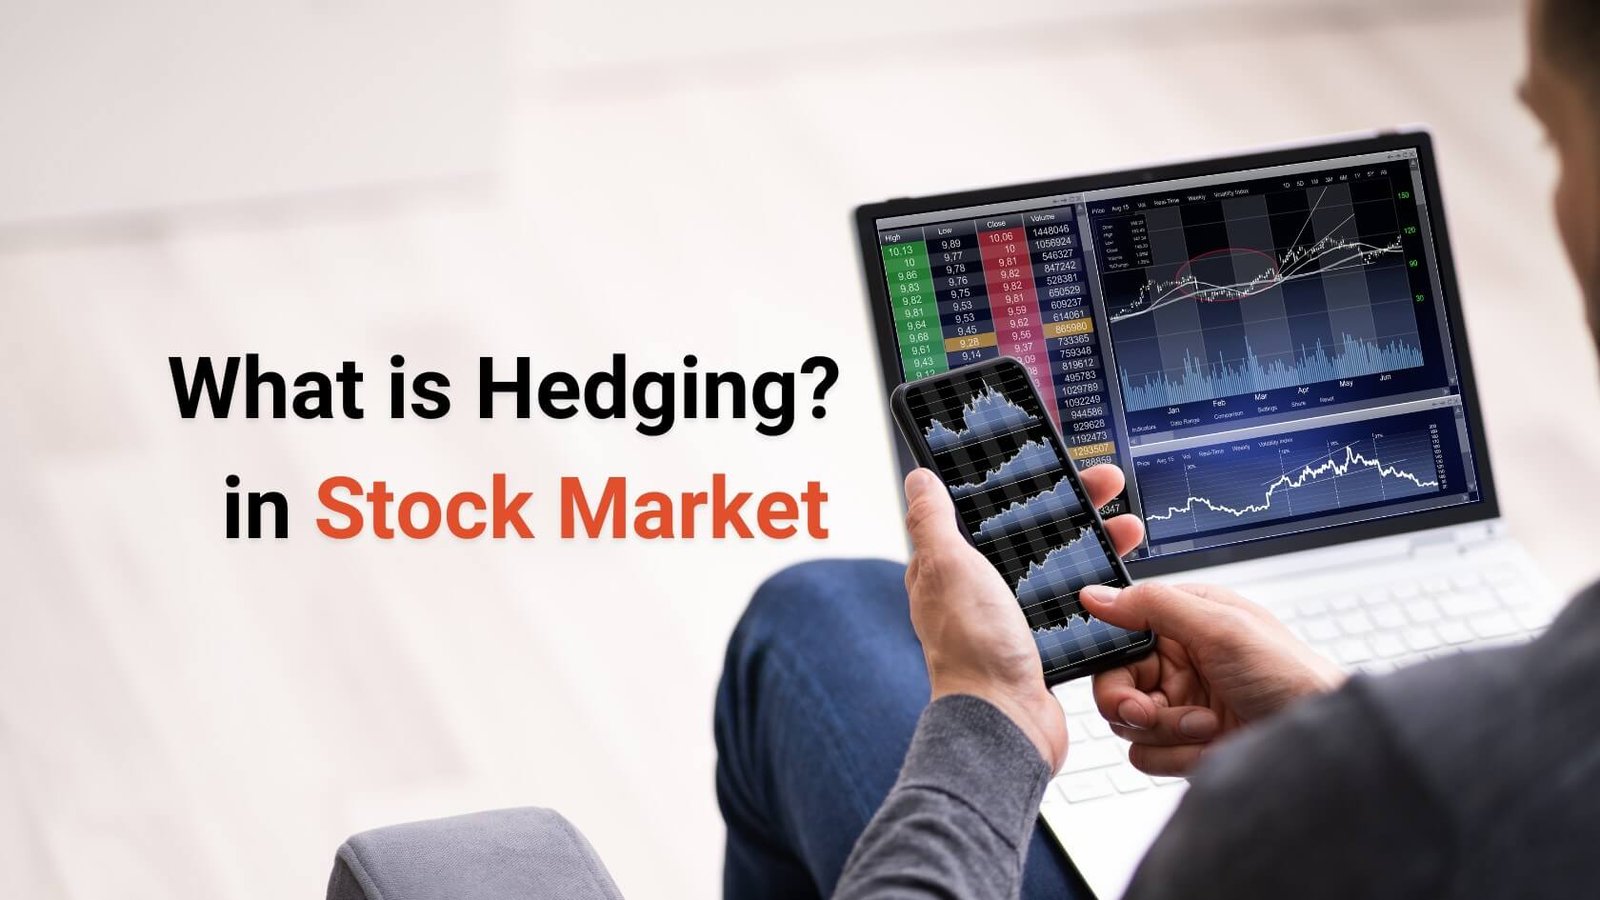 https://stockmarketkacommando.com/what-is-hedging-in-stock-market/